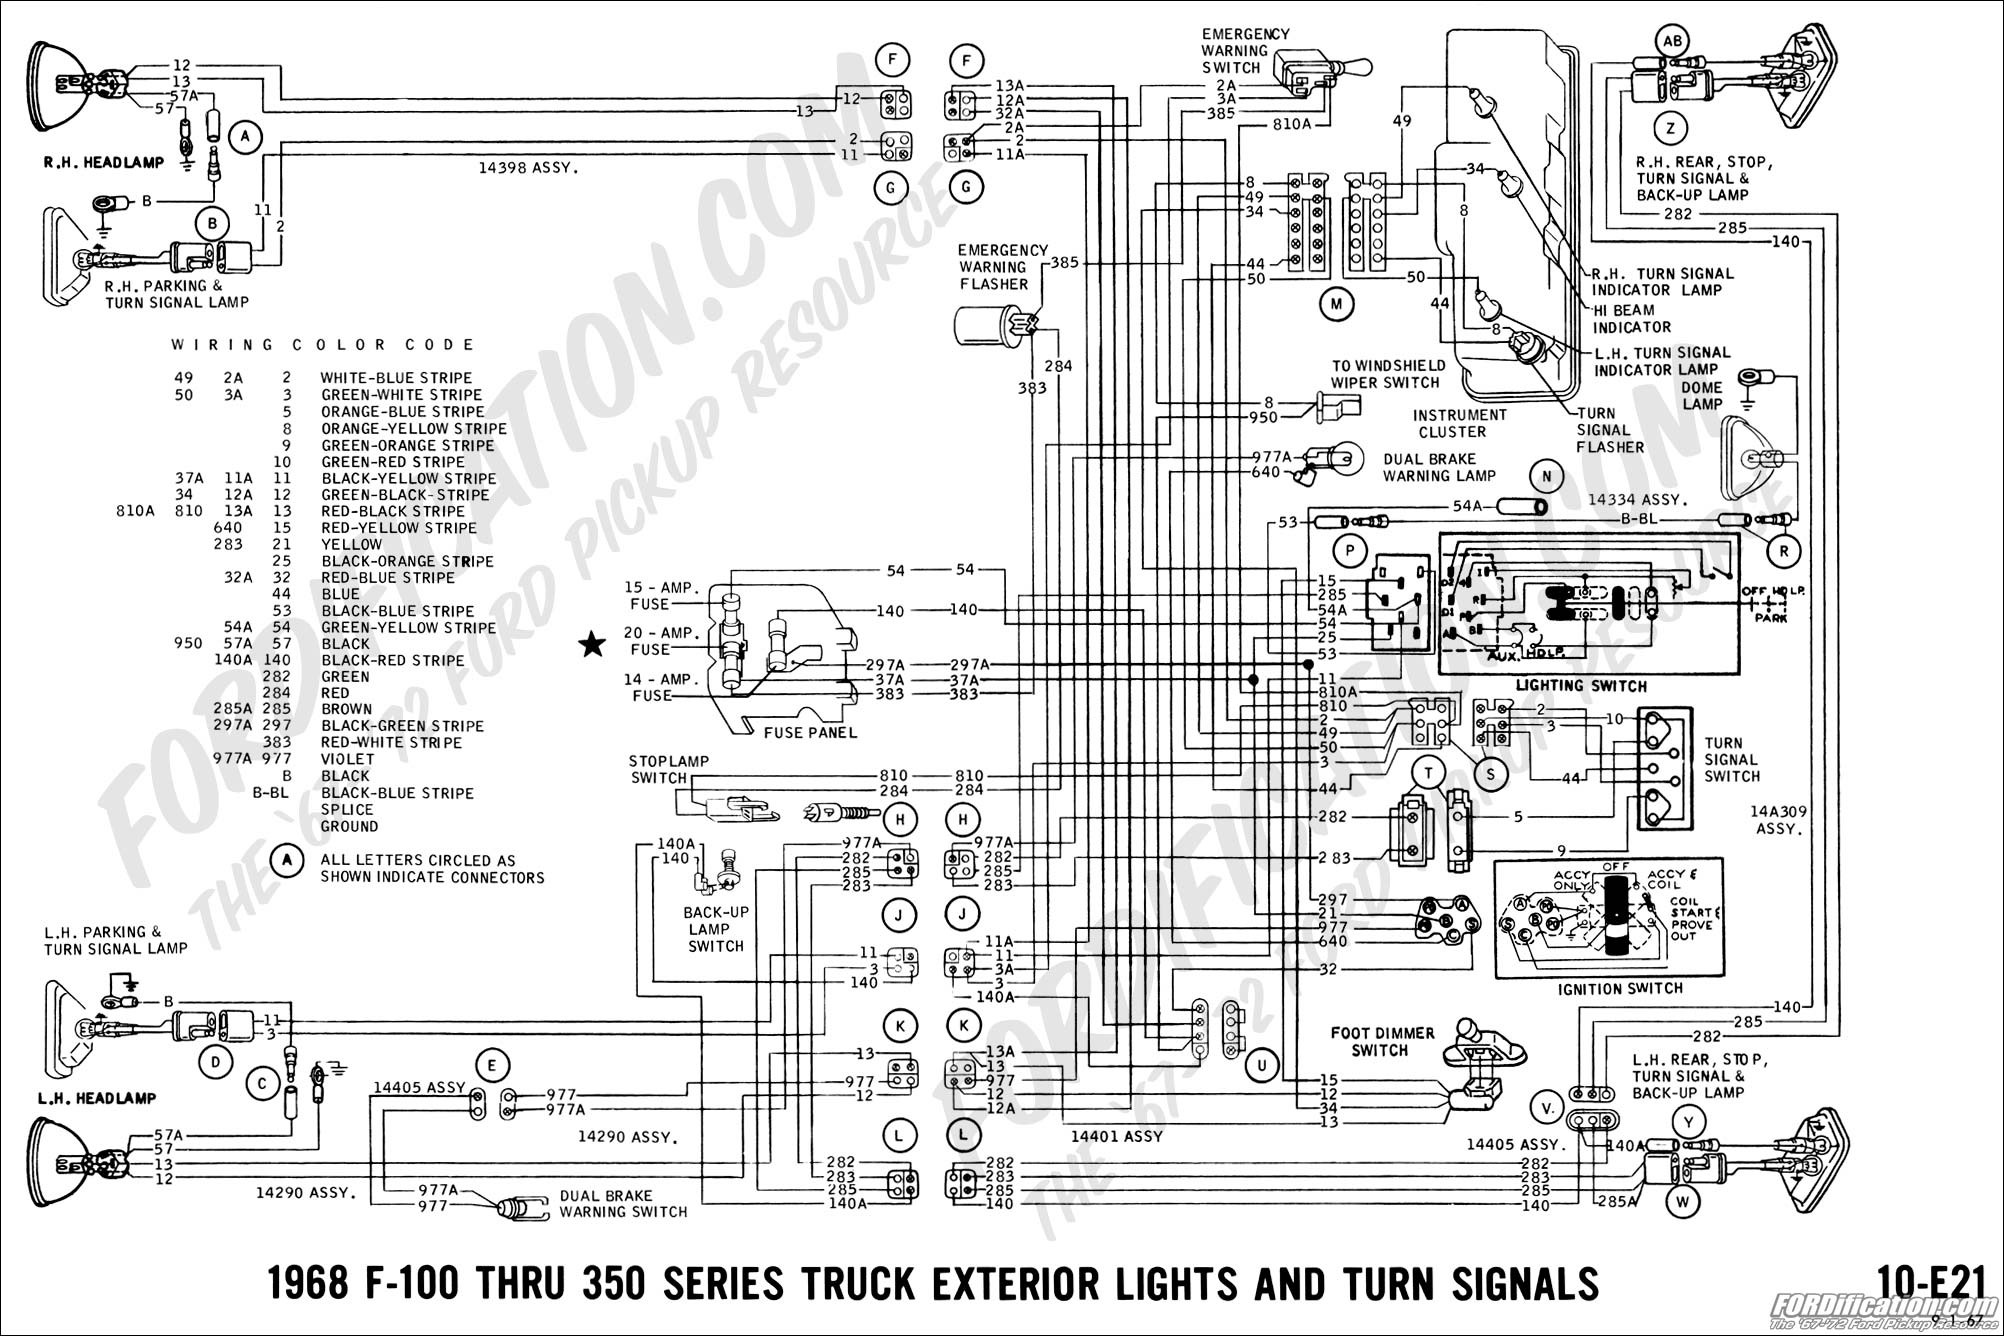 Brake Switch Wiring Diagram ford Truck Technical Drawings and Schematics Section H Wiring Of Brake Switch Wiring Diagram